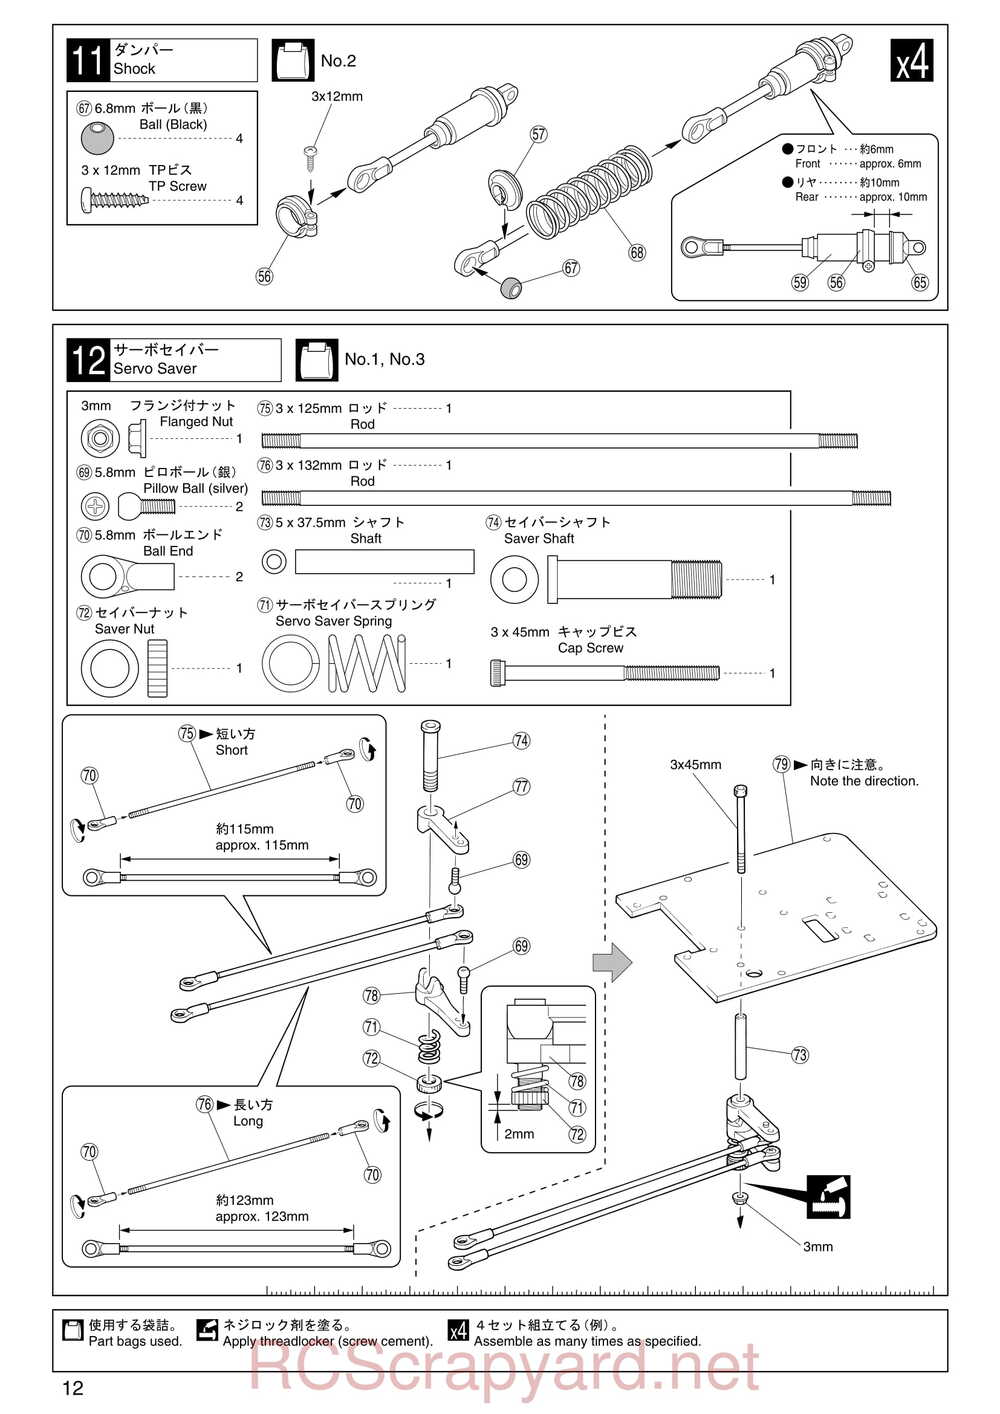 Kyosho - 31224 - Mad-Armour - Manual - Page 12